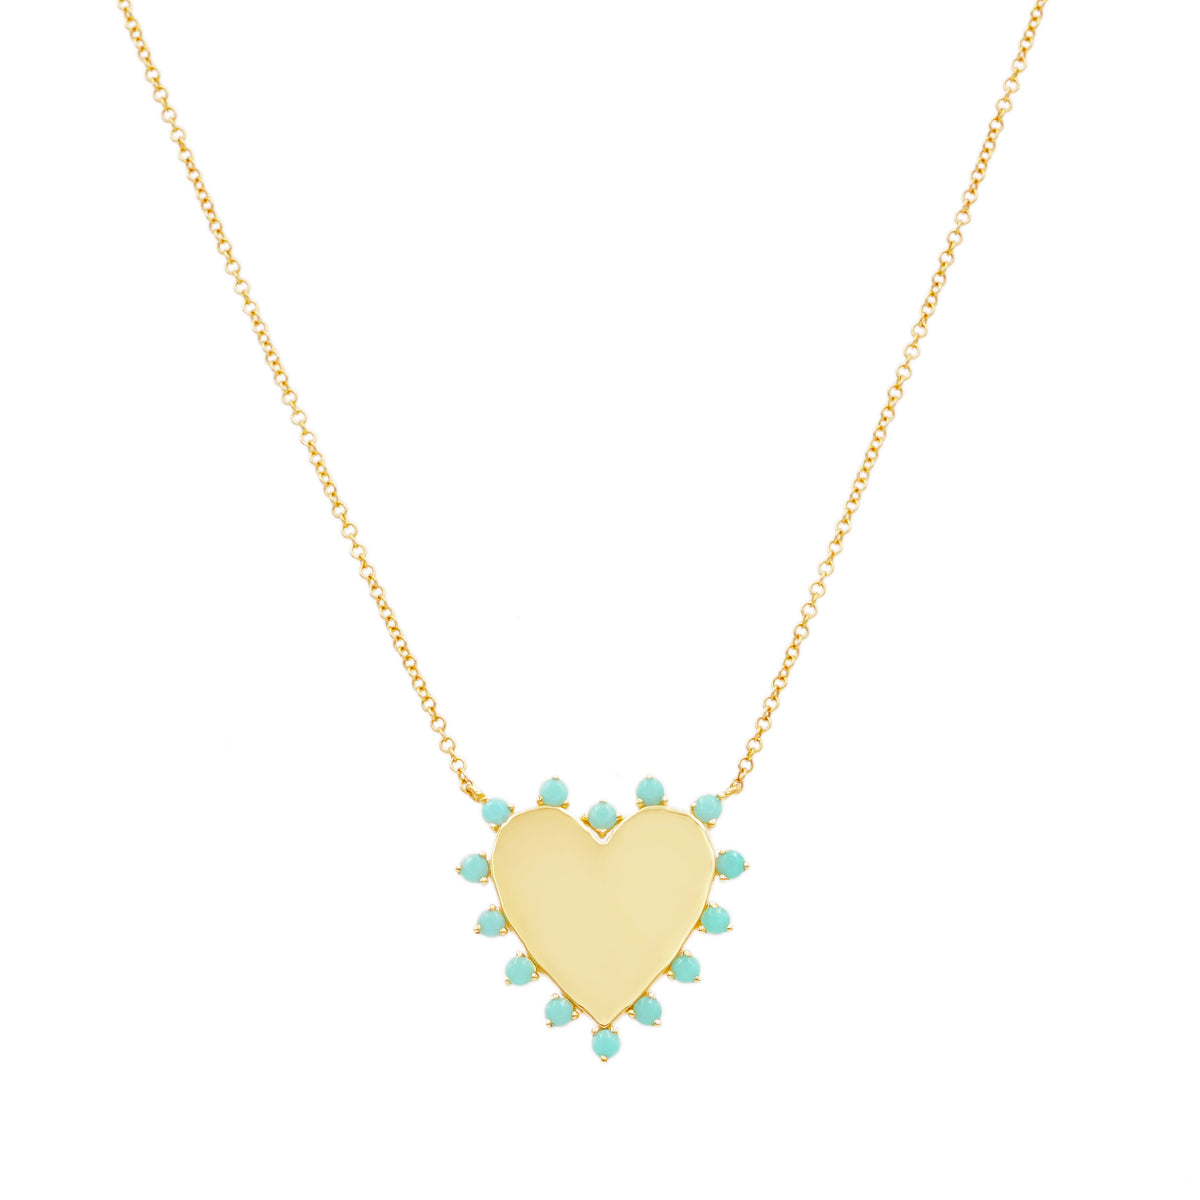 Solid Gold Heart Necklace with Turquoise